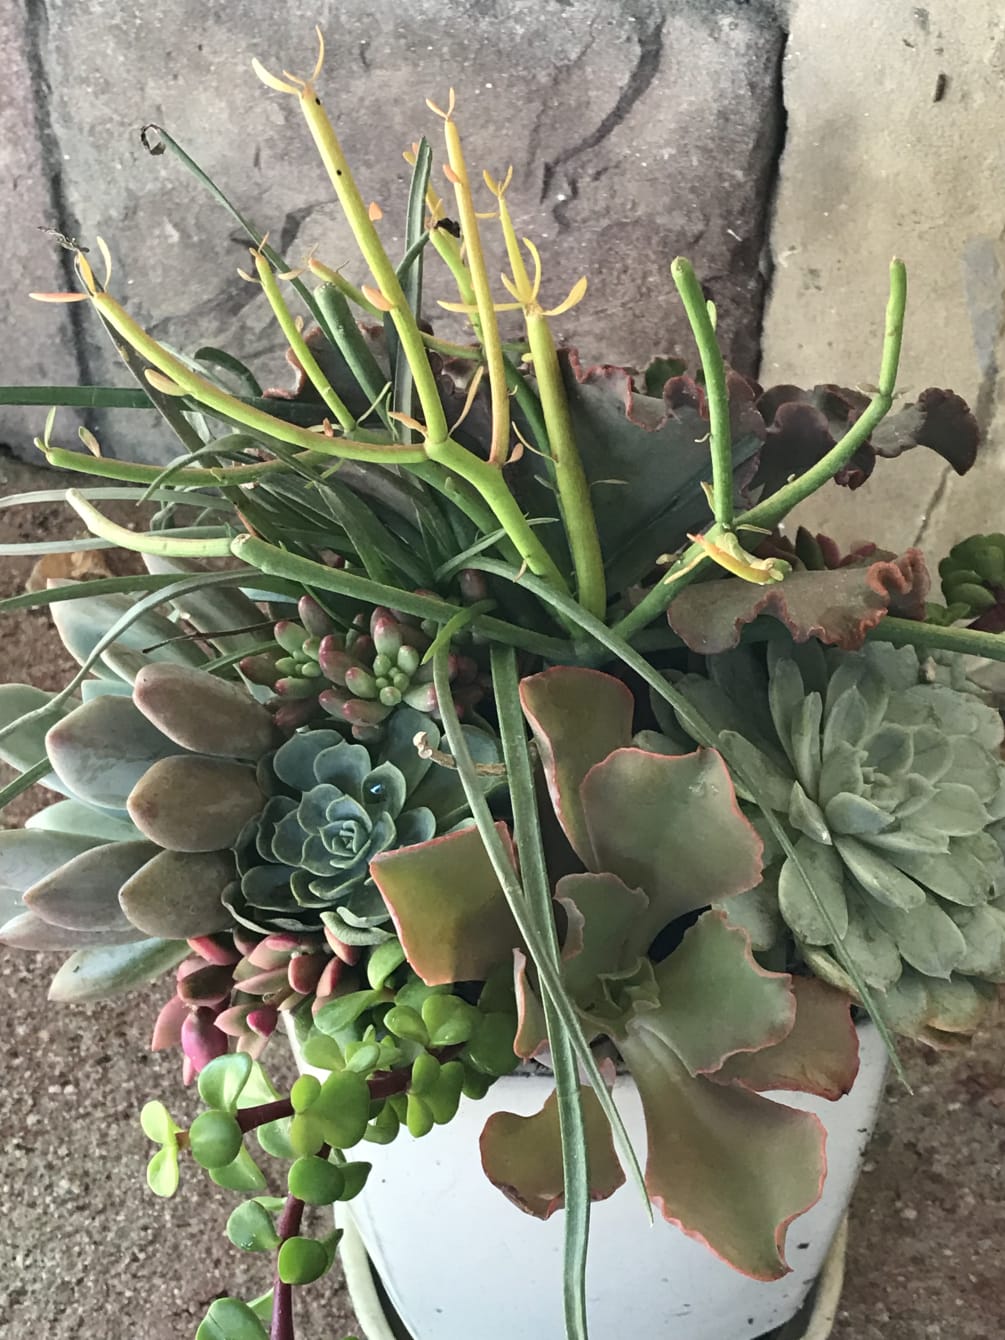 Planter with succulents prettier than any arrangement.